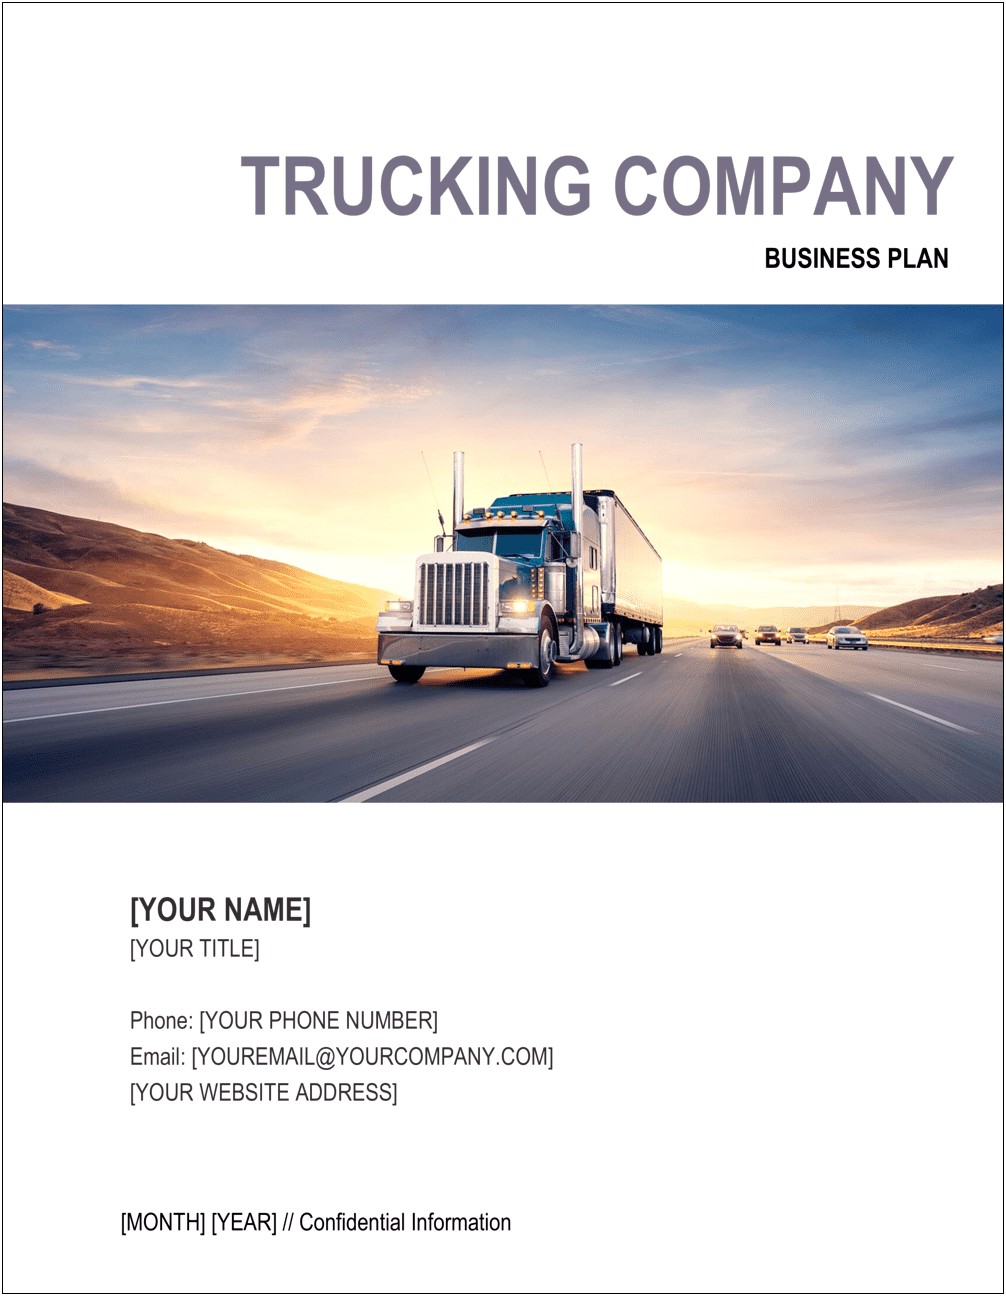 Free Business Plan Template For Transport Company